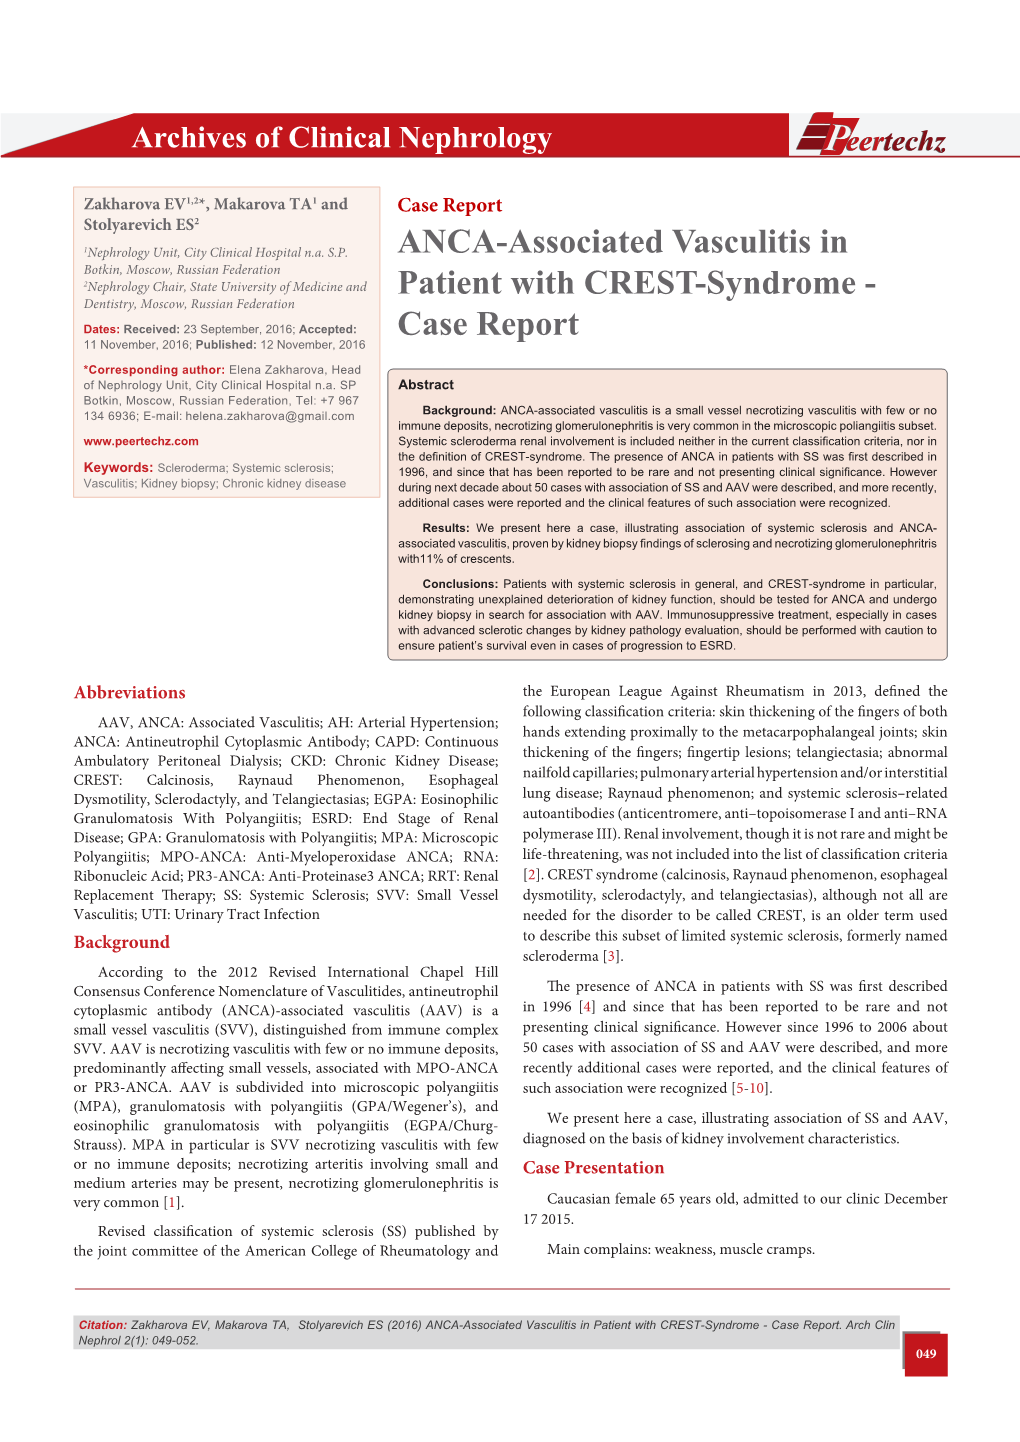 ANCA-Associated Vasculitis in Patient with CREST-Syndrome - Case Report